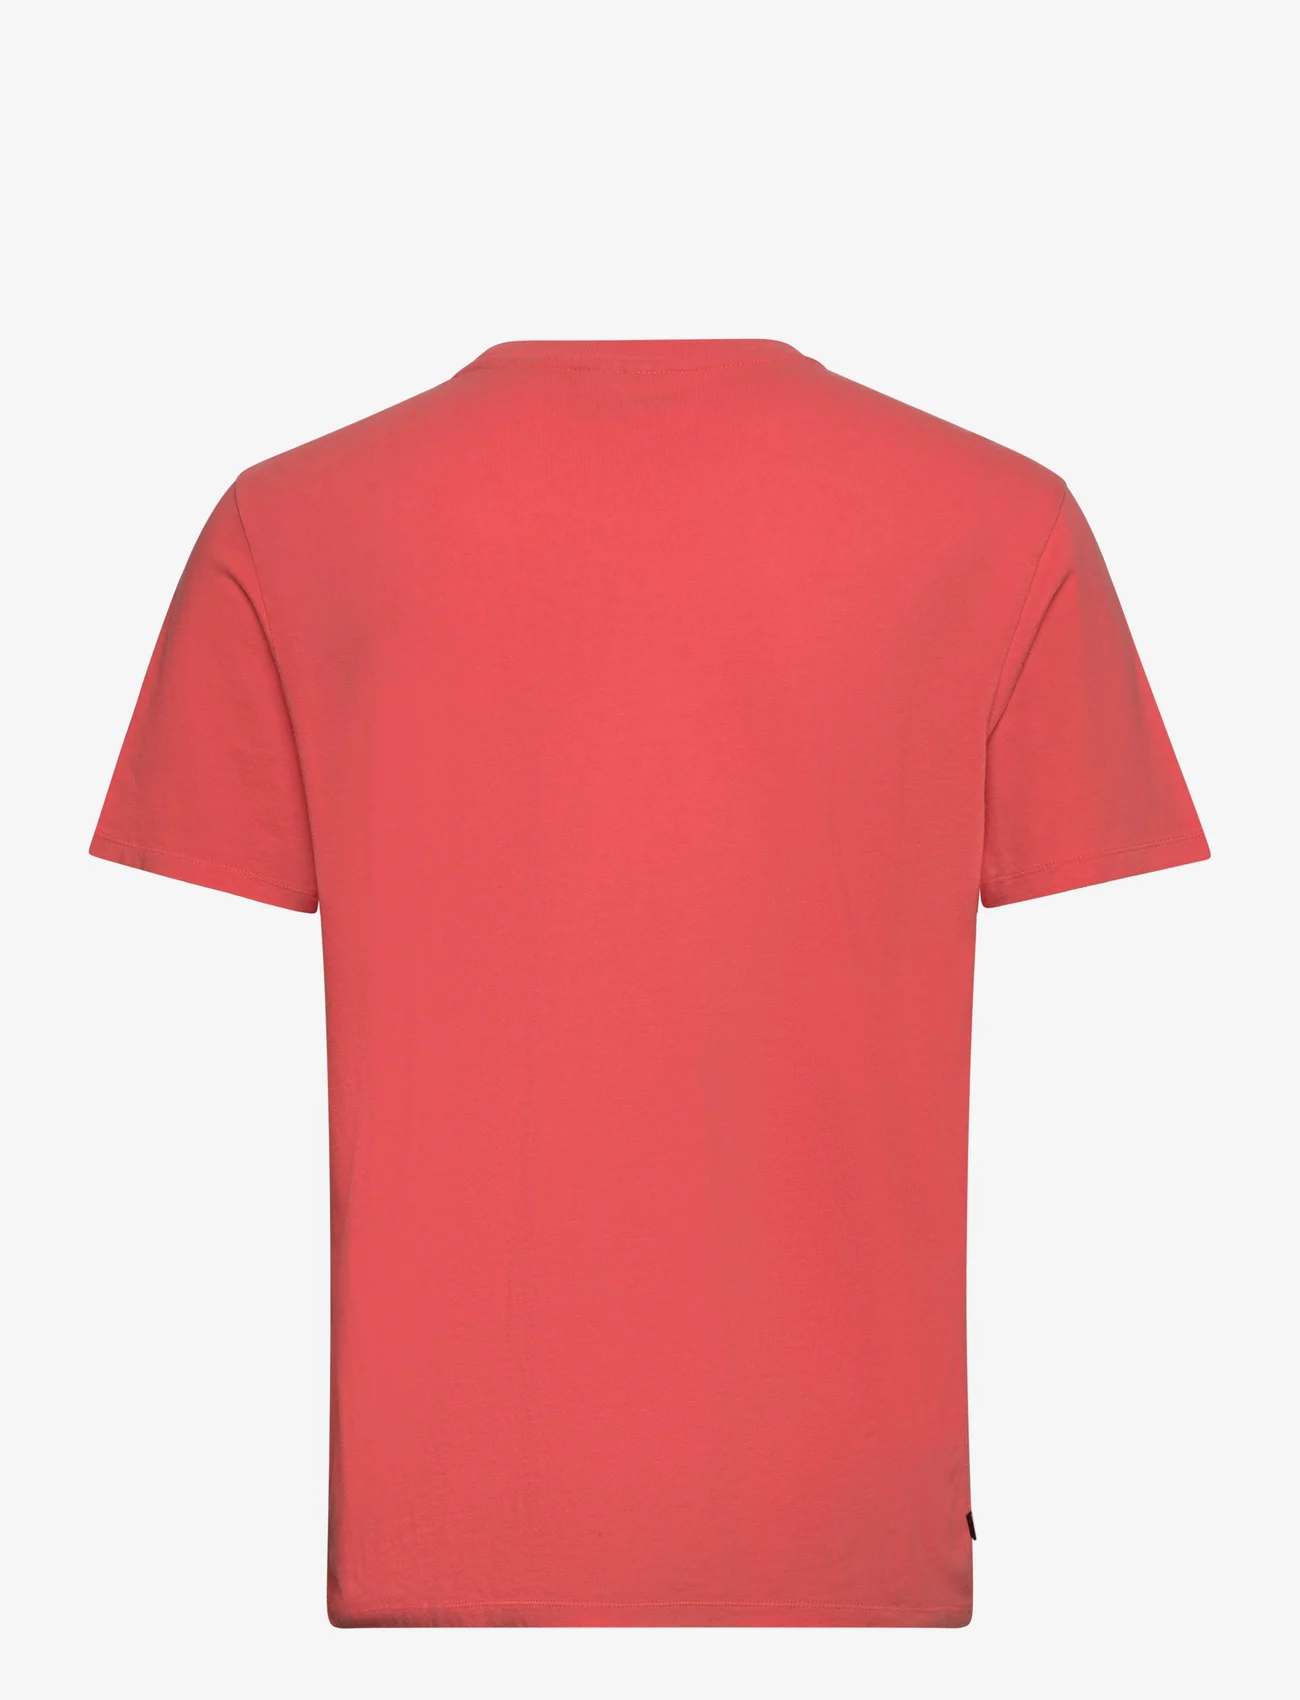 Superdry Sport - OVERDYED LOGO LOOSE TEE - lowest prices - hot coral - 1